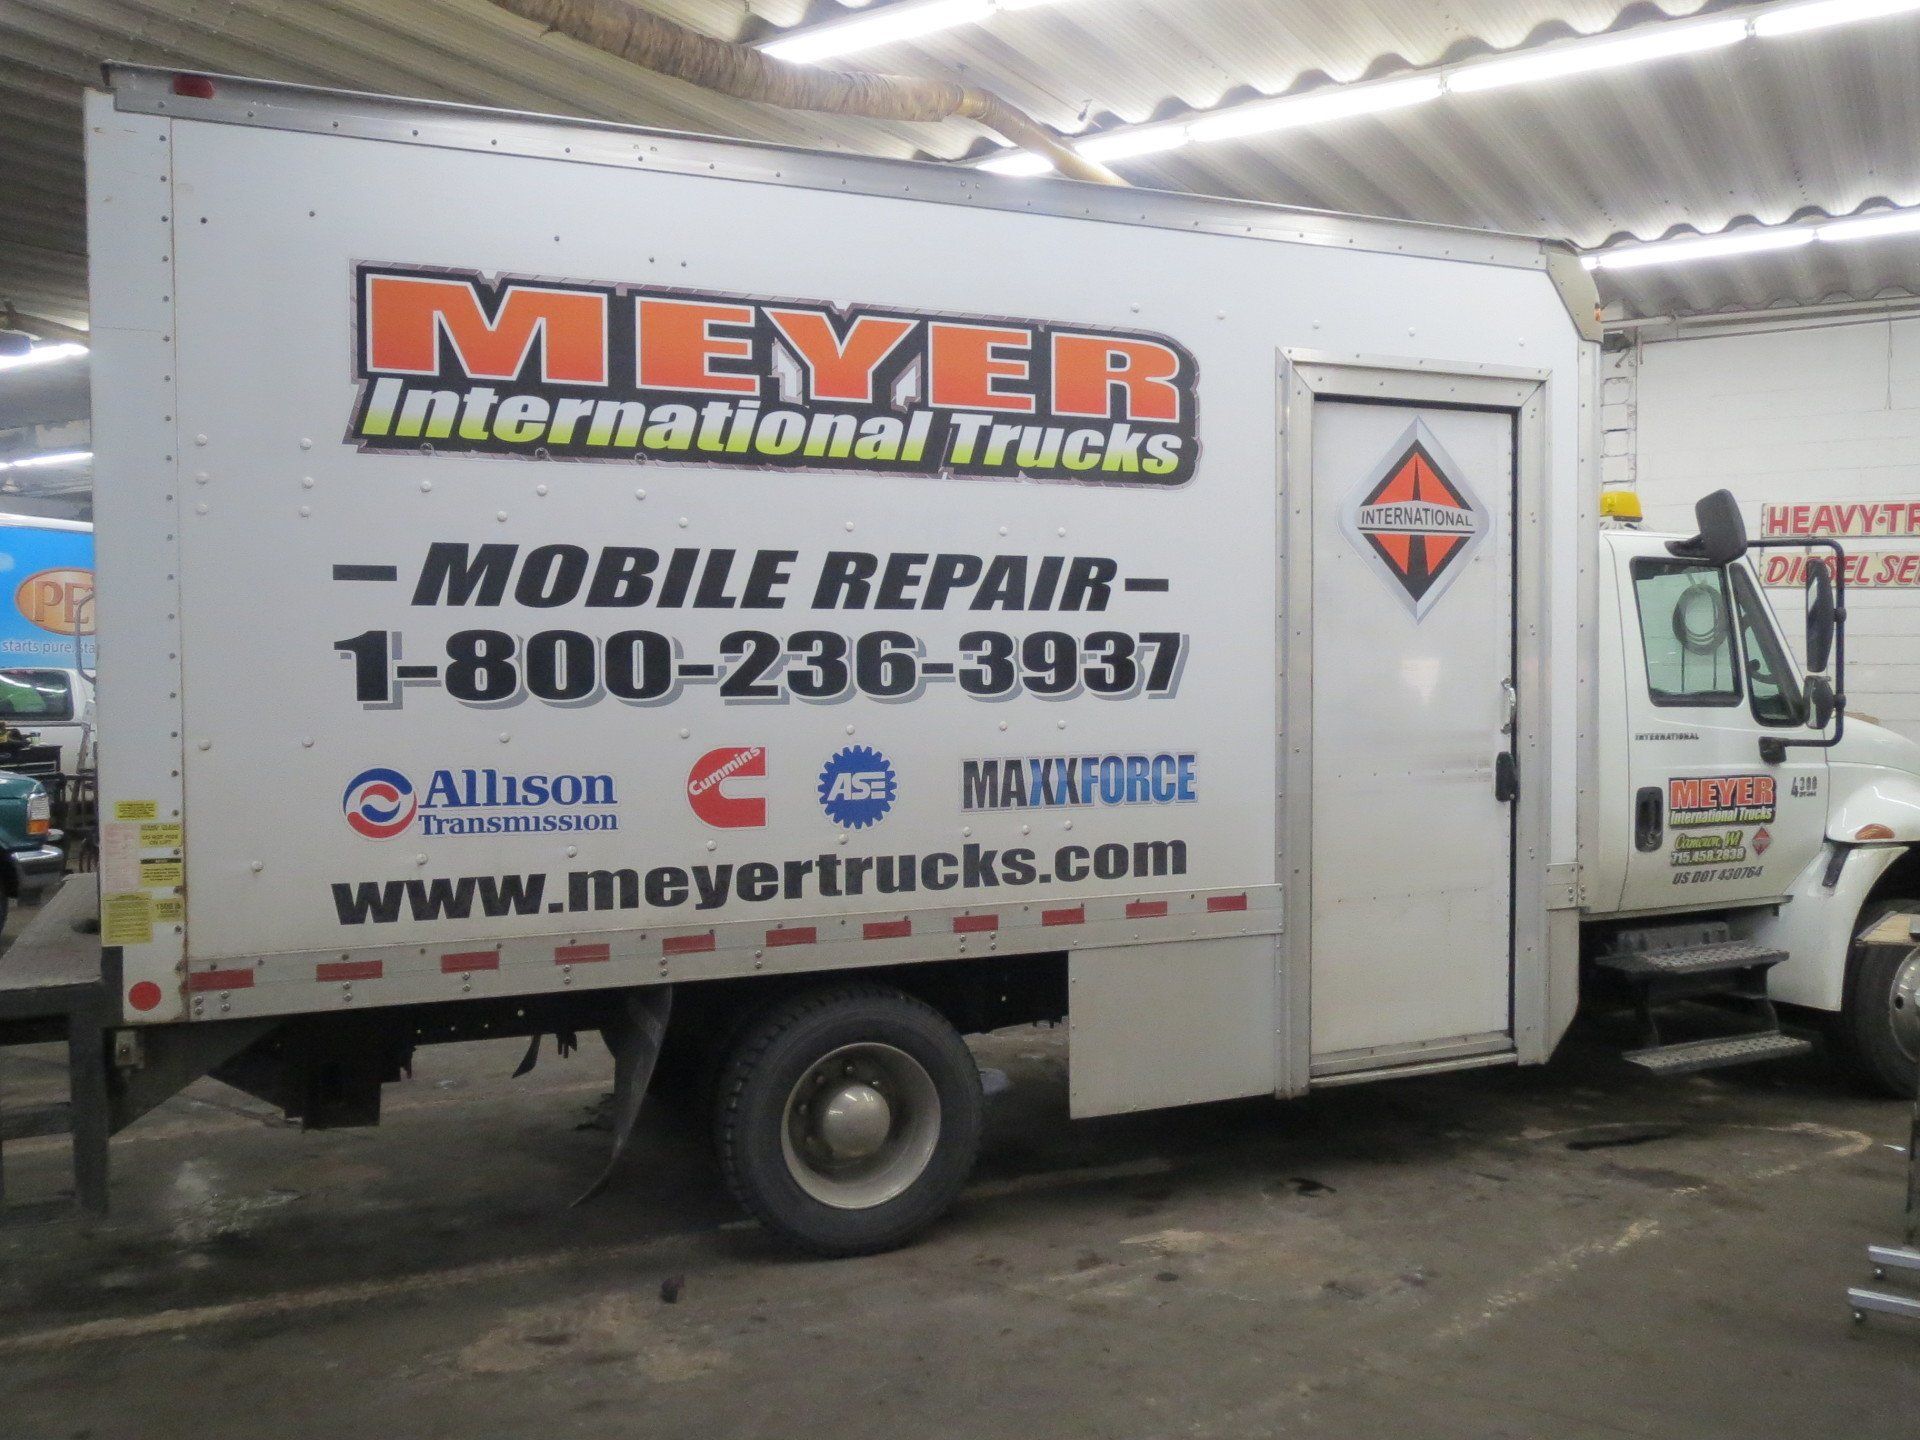 Reliable mobile semi truck repair services for International, Cummins, Allison and other major brands.